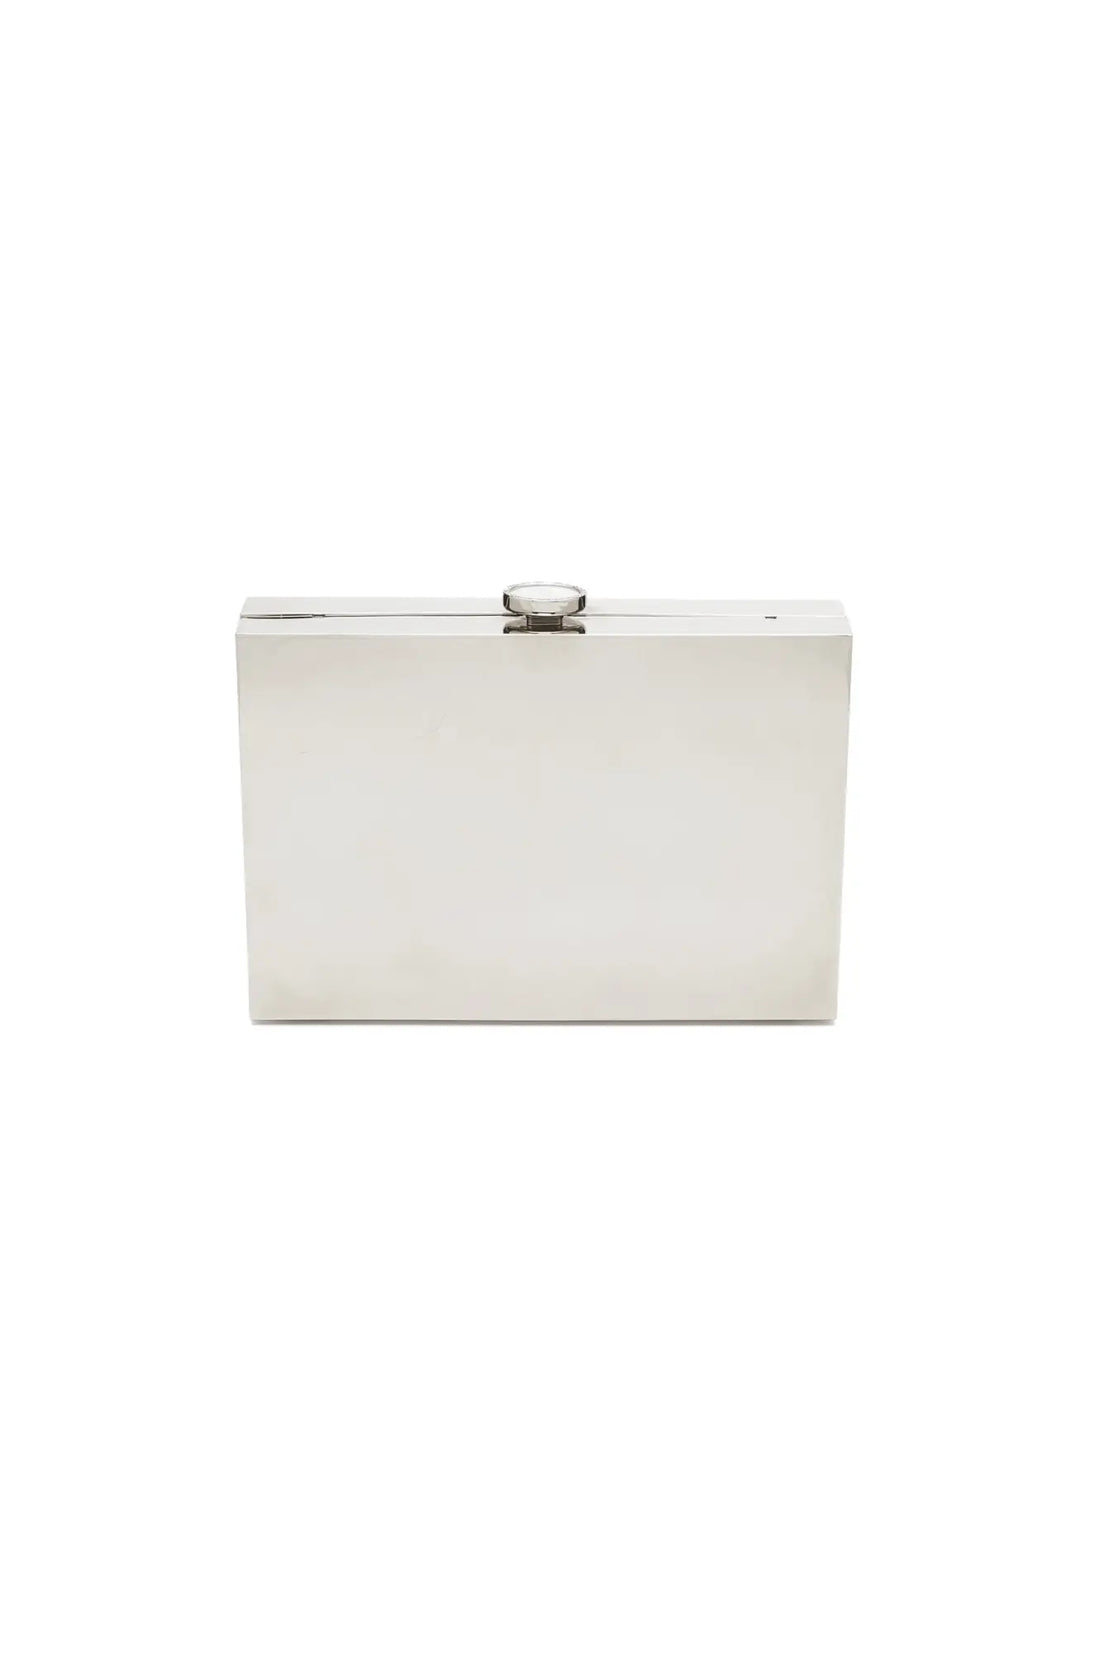 A plain white Ella Clutch - Mirror Silver purse with a silver metallic clasp on a white background by The Bella Rosa Collection.